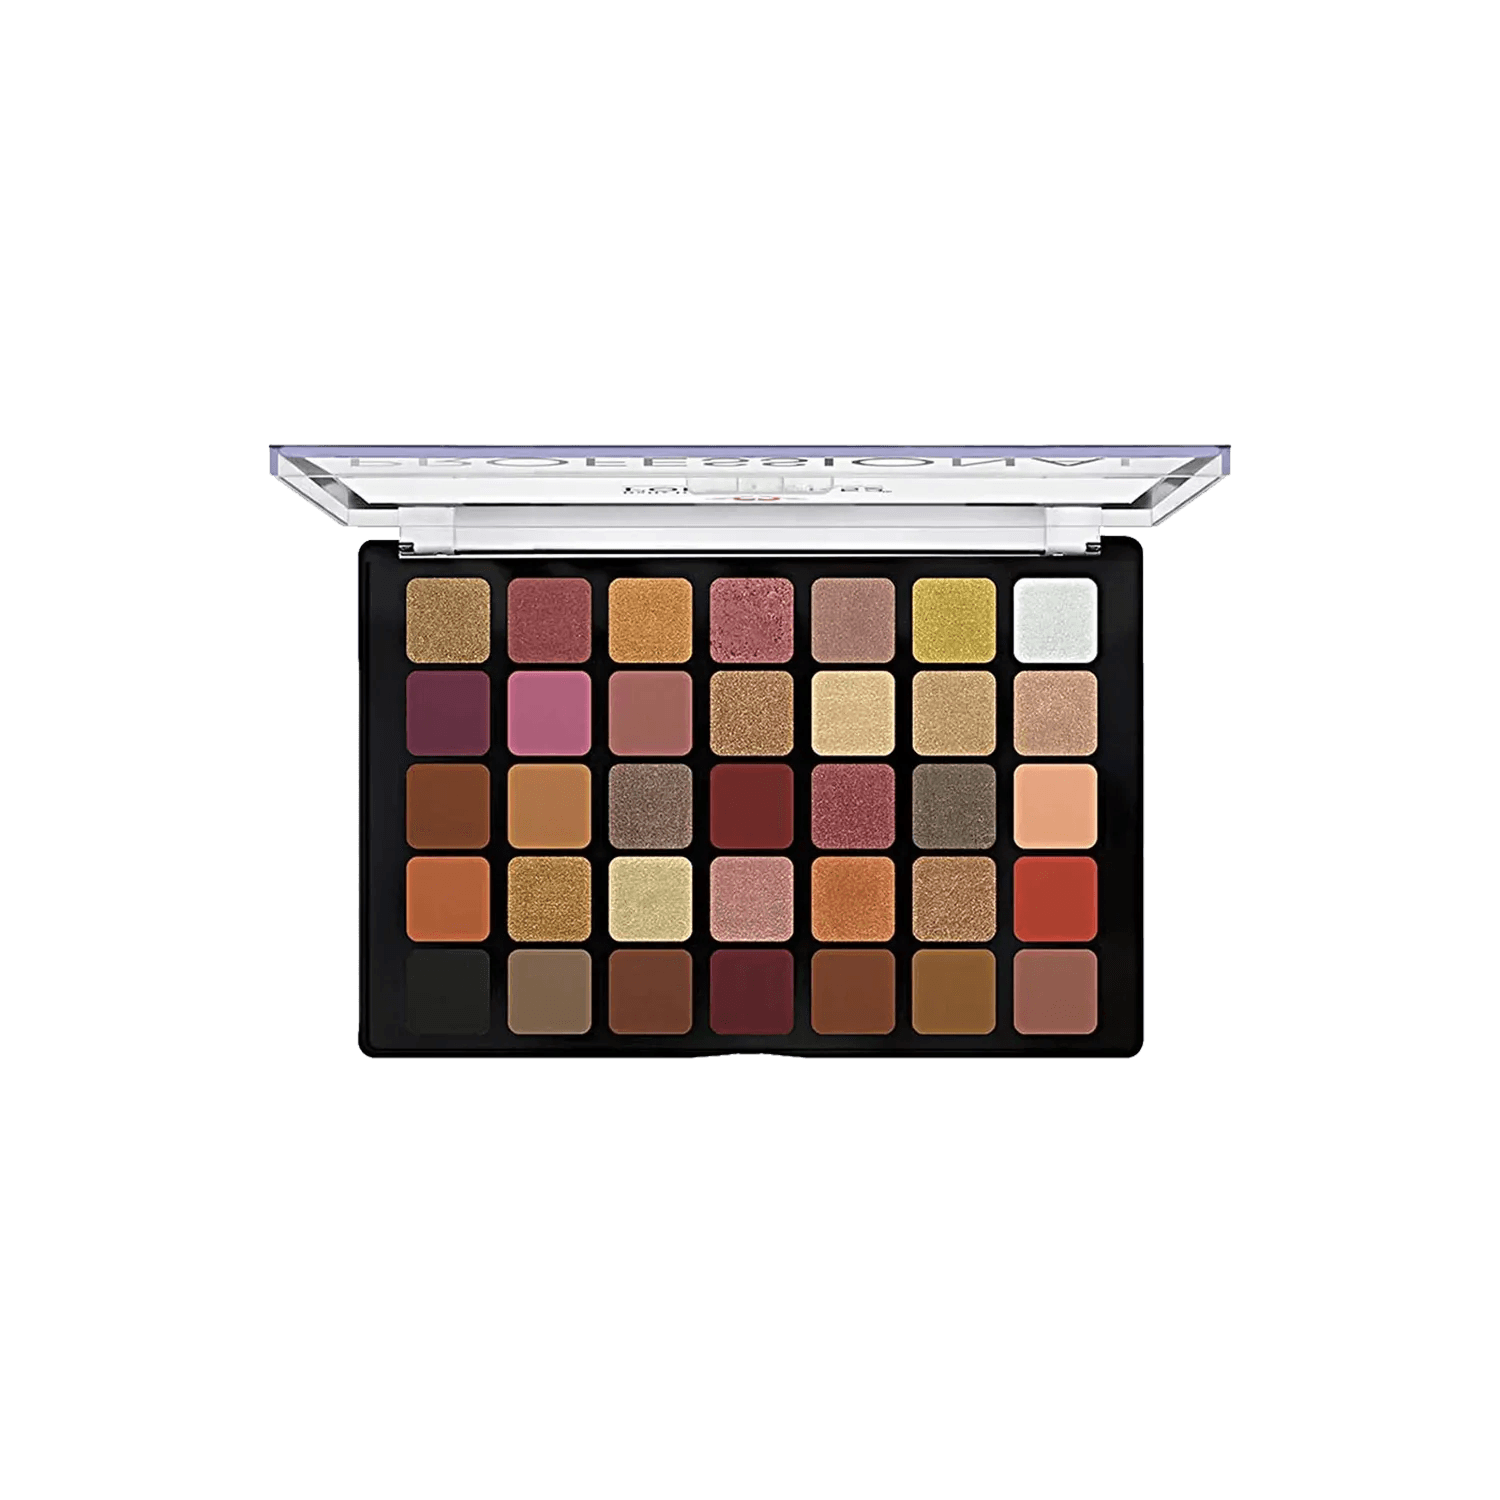 Daily Life Forever52 | Daily Life Forever52 Ultimate Edition Eyeshadow Palette UEP002 (53gm)